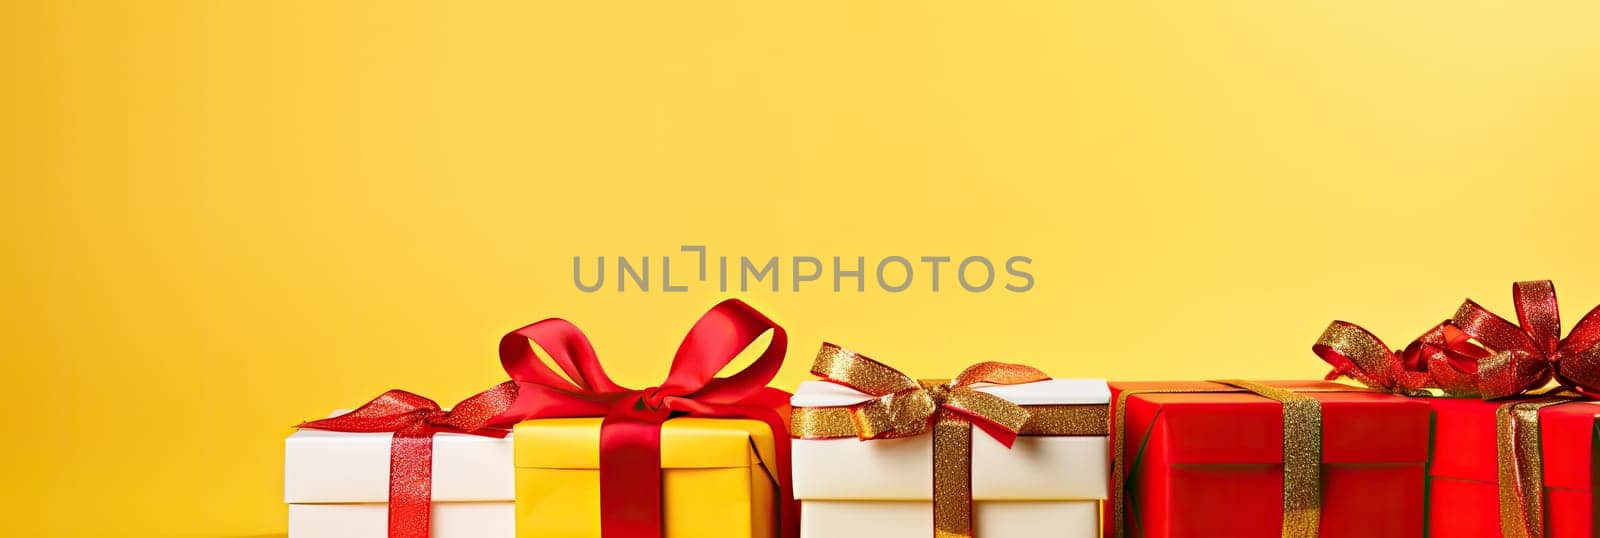 Holiday Gift Boxes on Bright Yellow Background by Yurich32